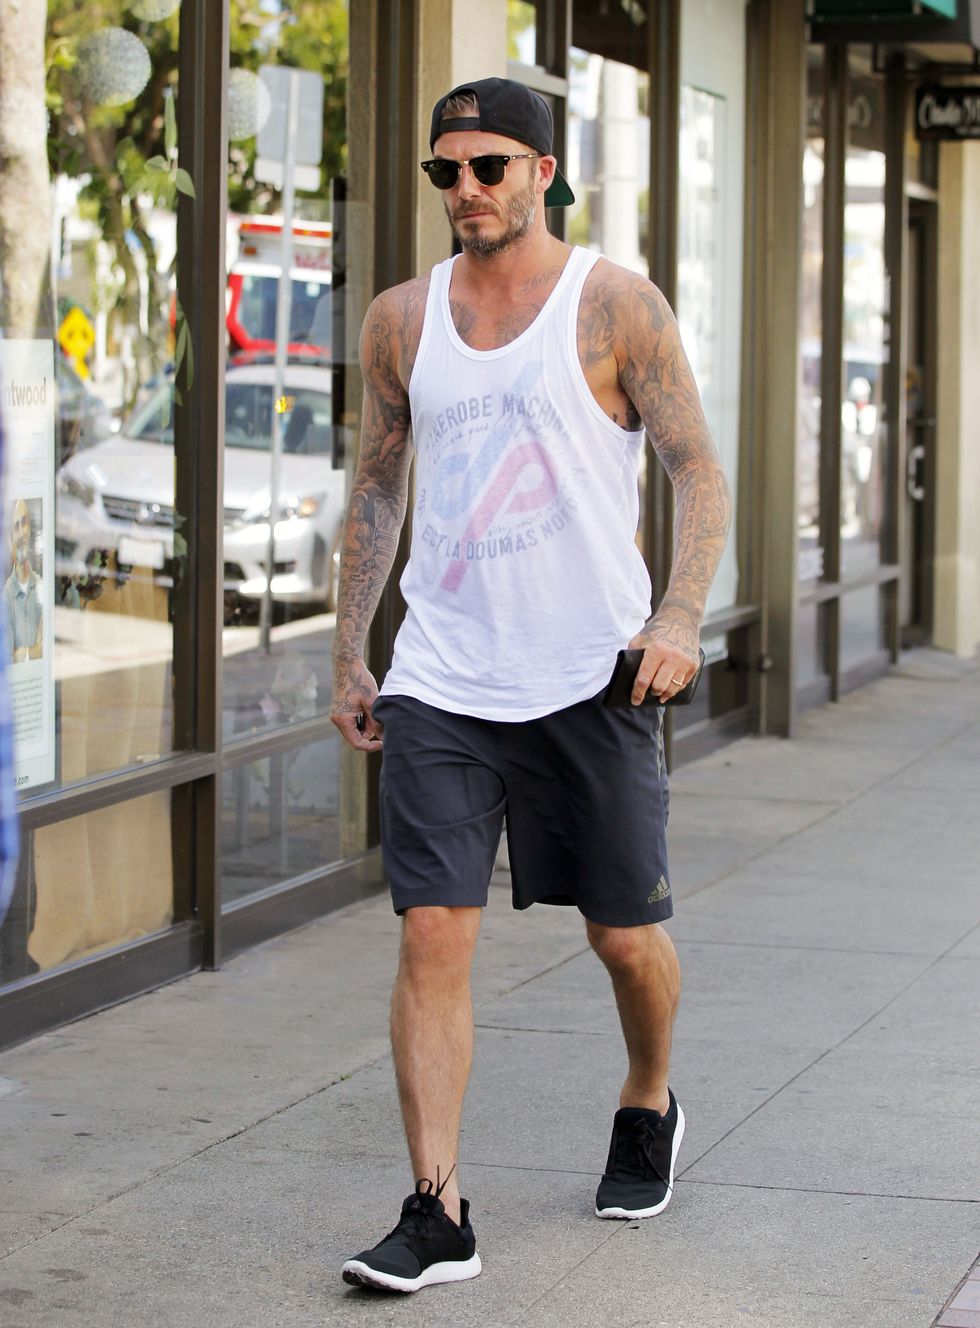 muscular male, wearing a tank top, shorts, sneakers, trips and f